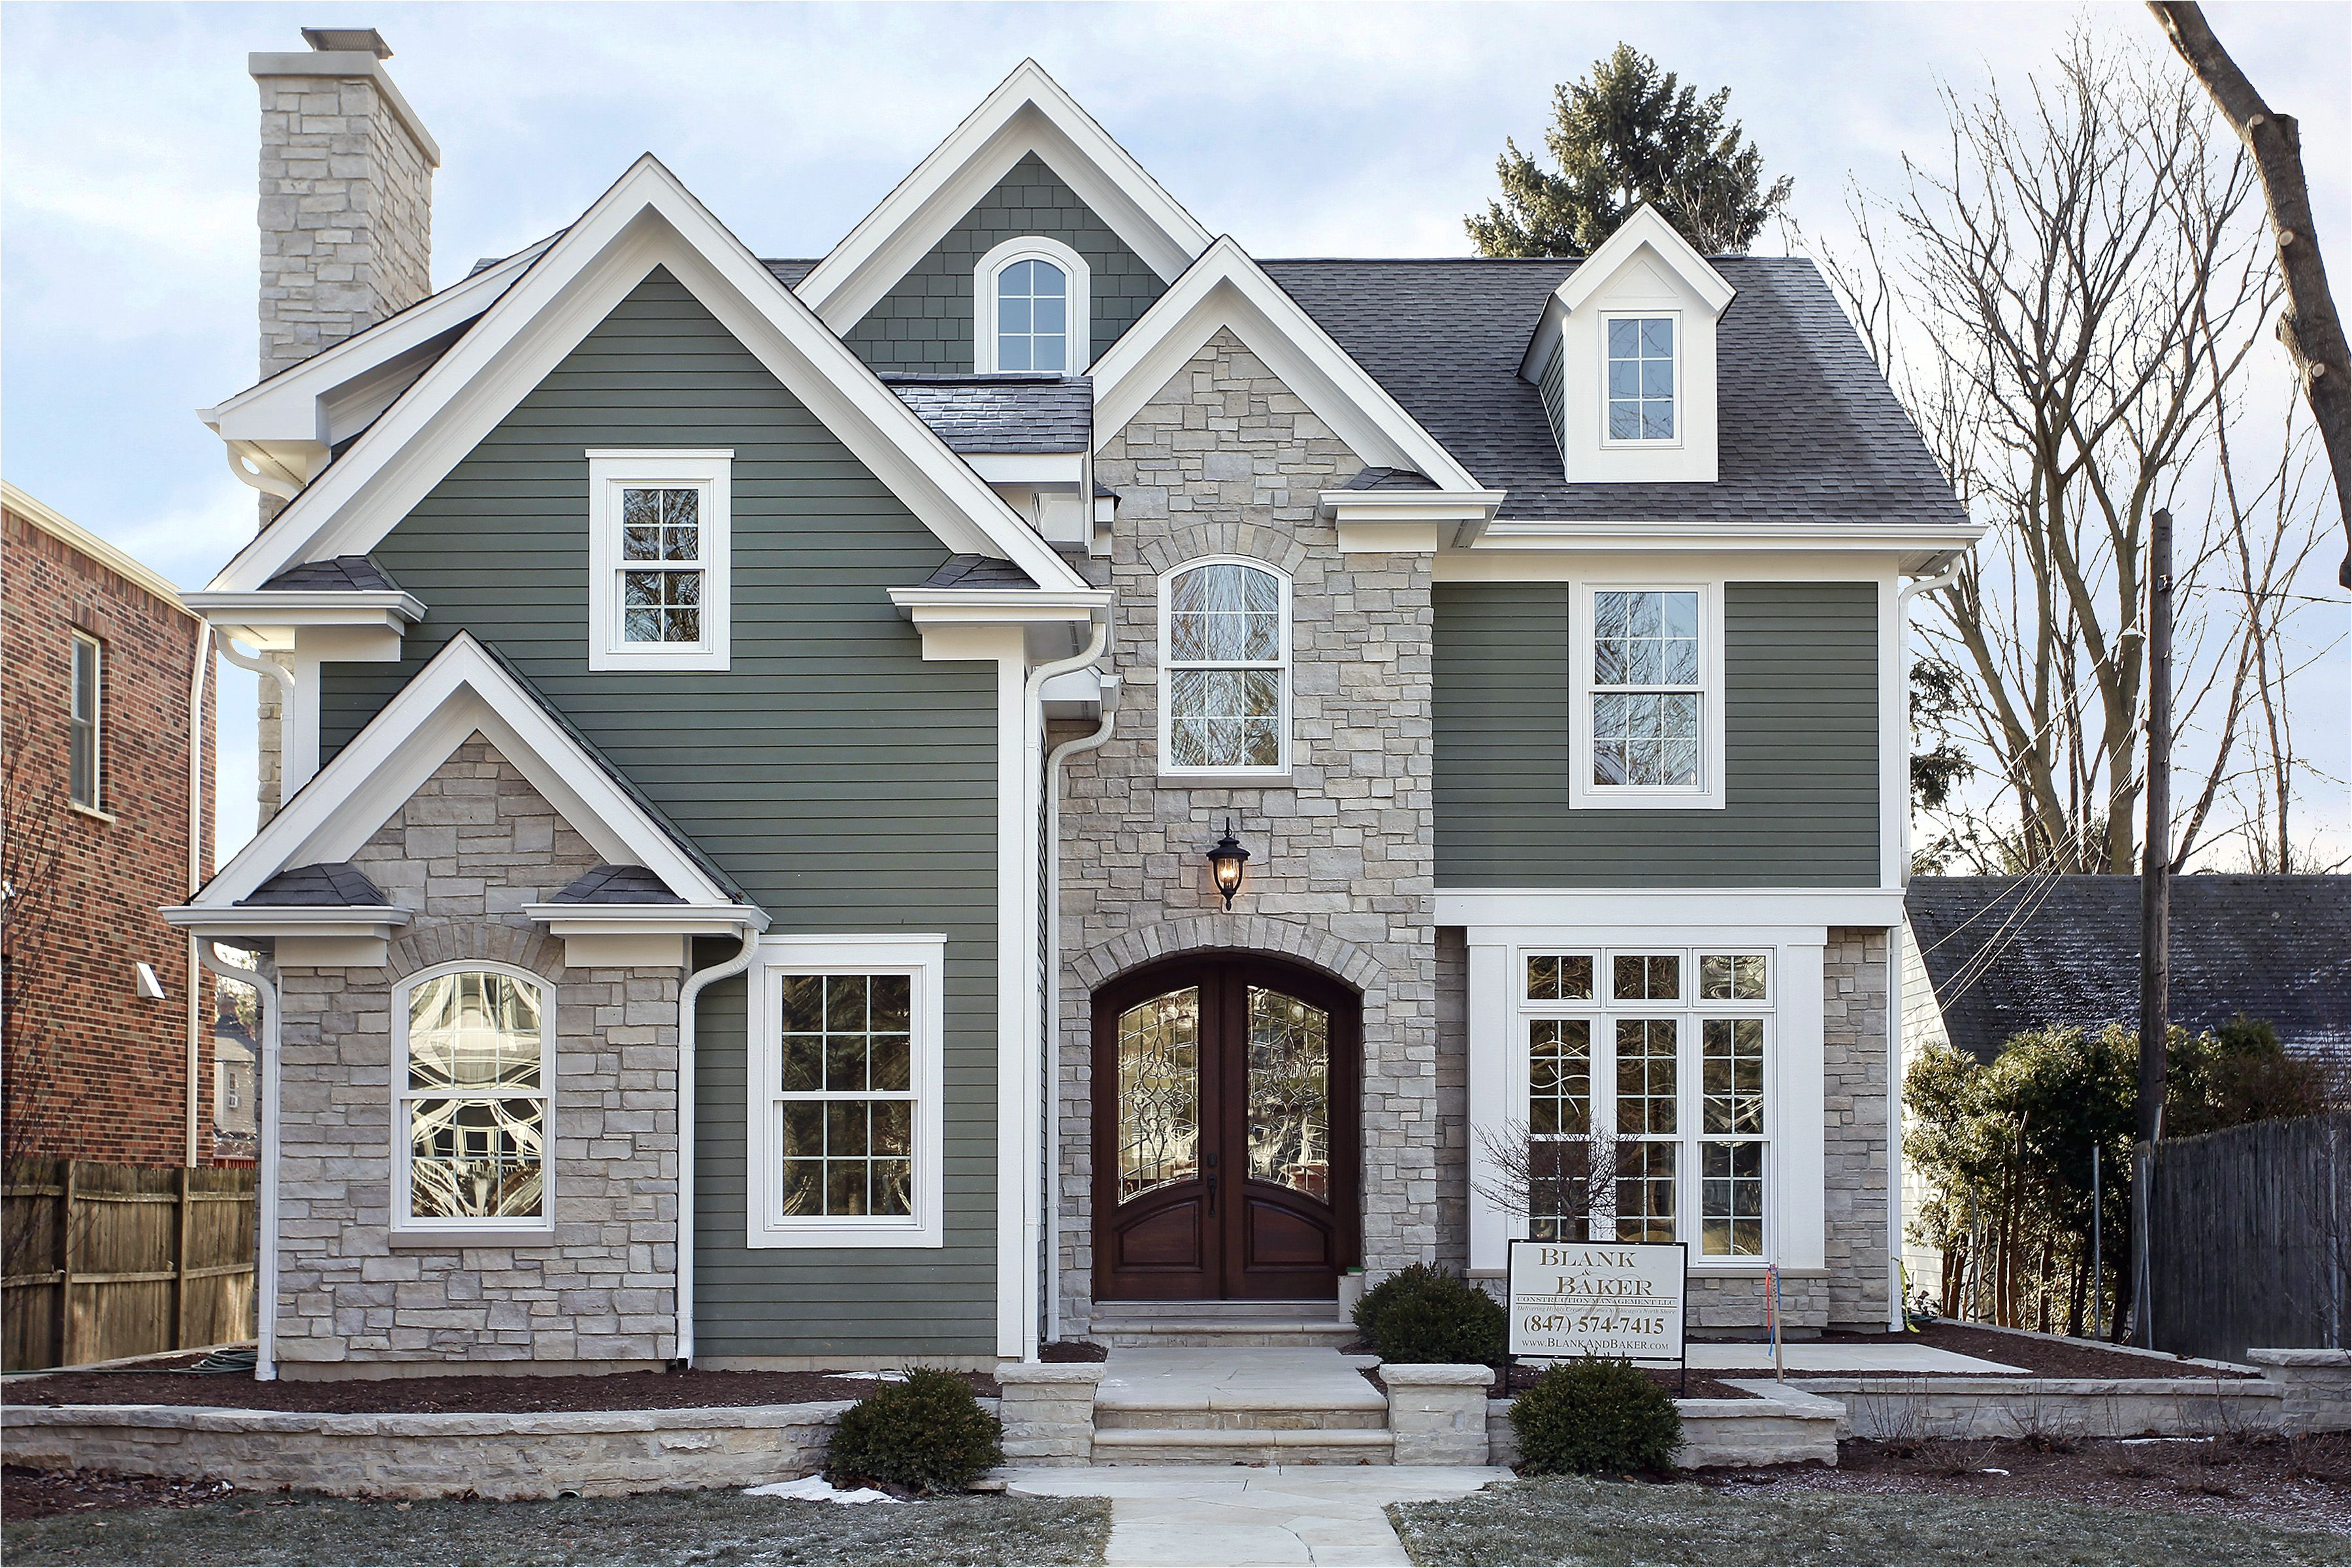 exterior paint colors you want a fresh new look for exterior of your home get inspired for your next exterior painting project with our color gallery